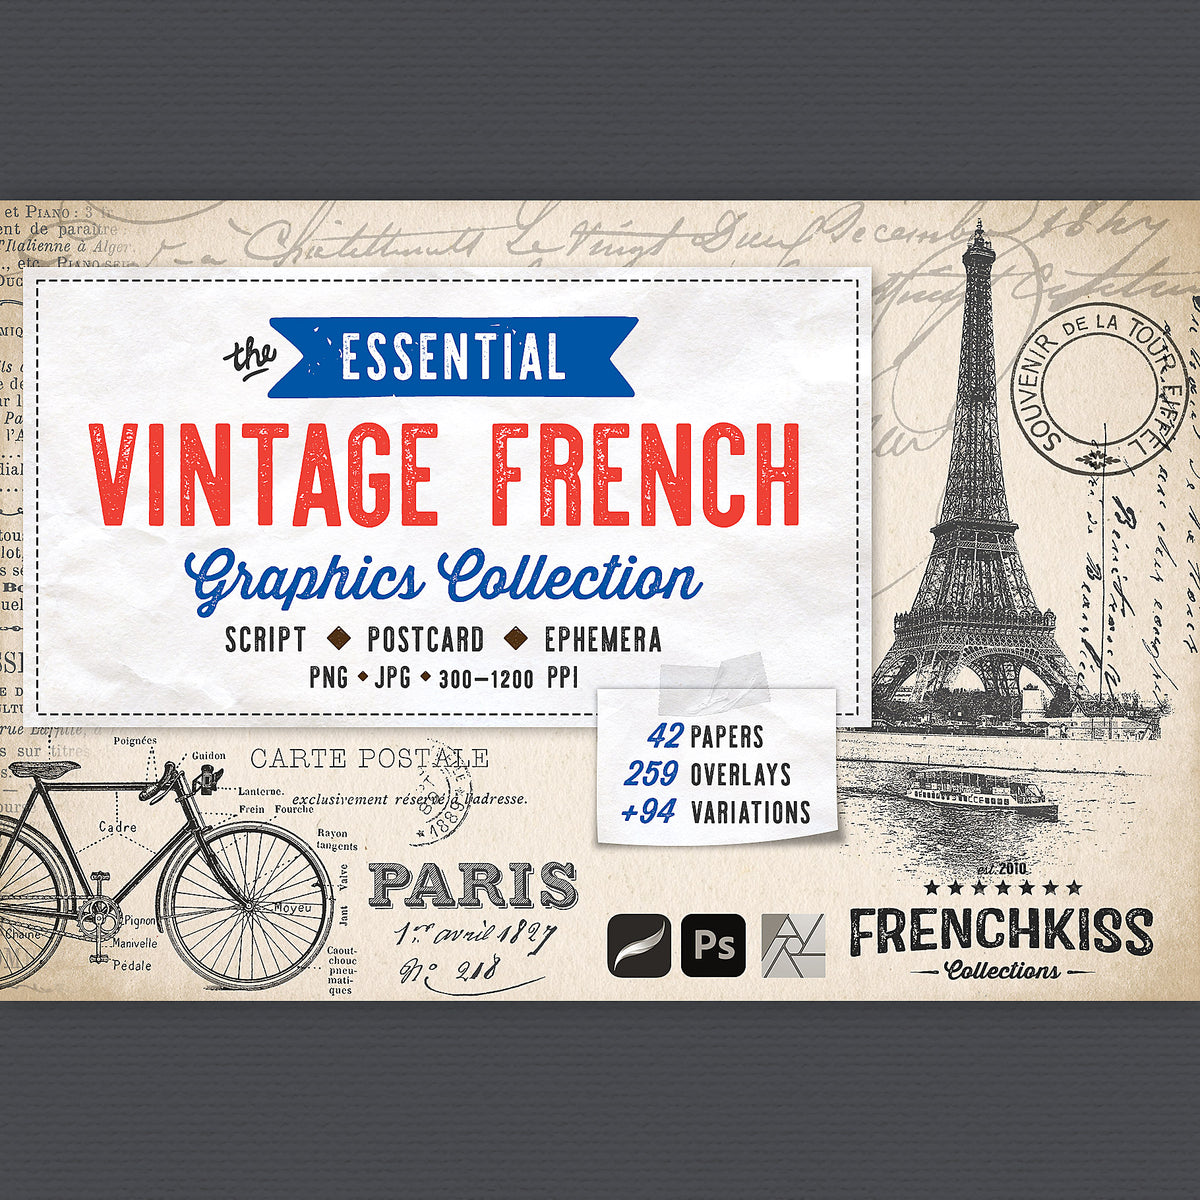 The Essential Vintage French Graphics Collection with 395 digital graphics from script to postcards.